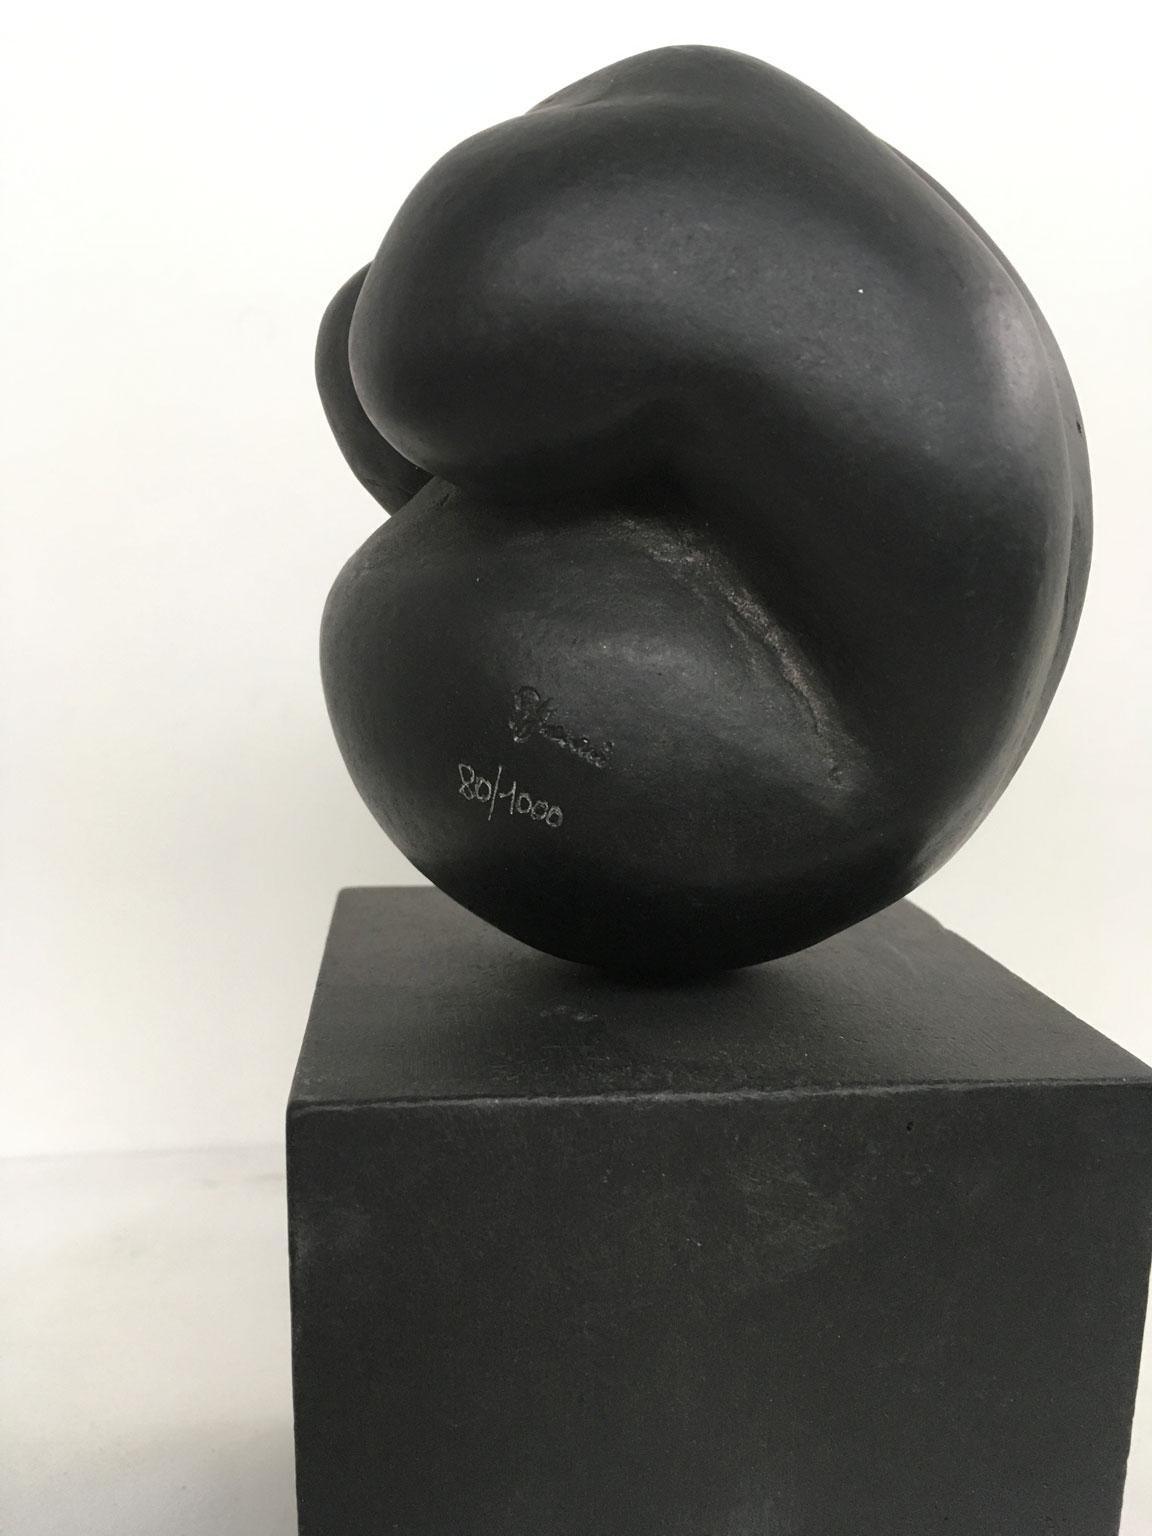 1988 Italy Black Aluminum Abstract Sculpture by Patrizia Guerresi Title Deji For Sale 1